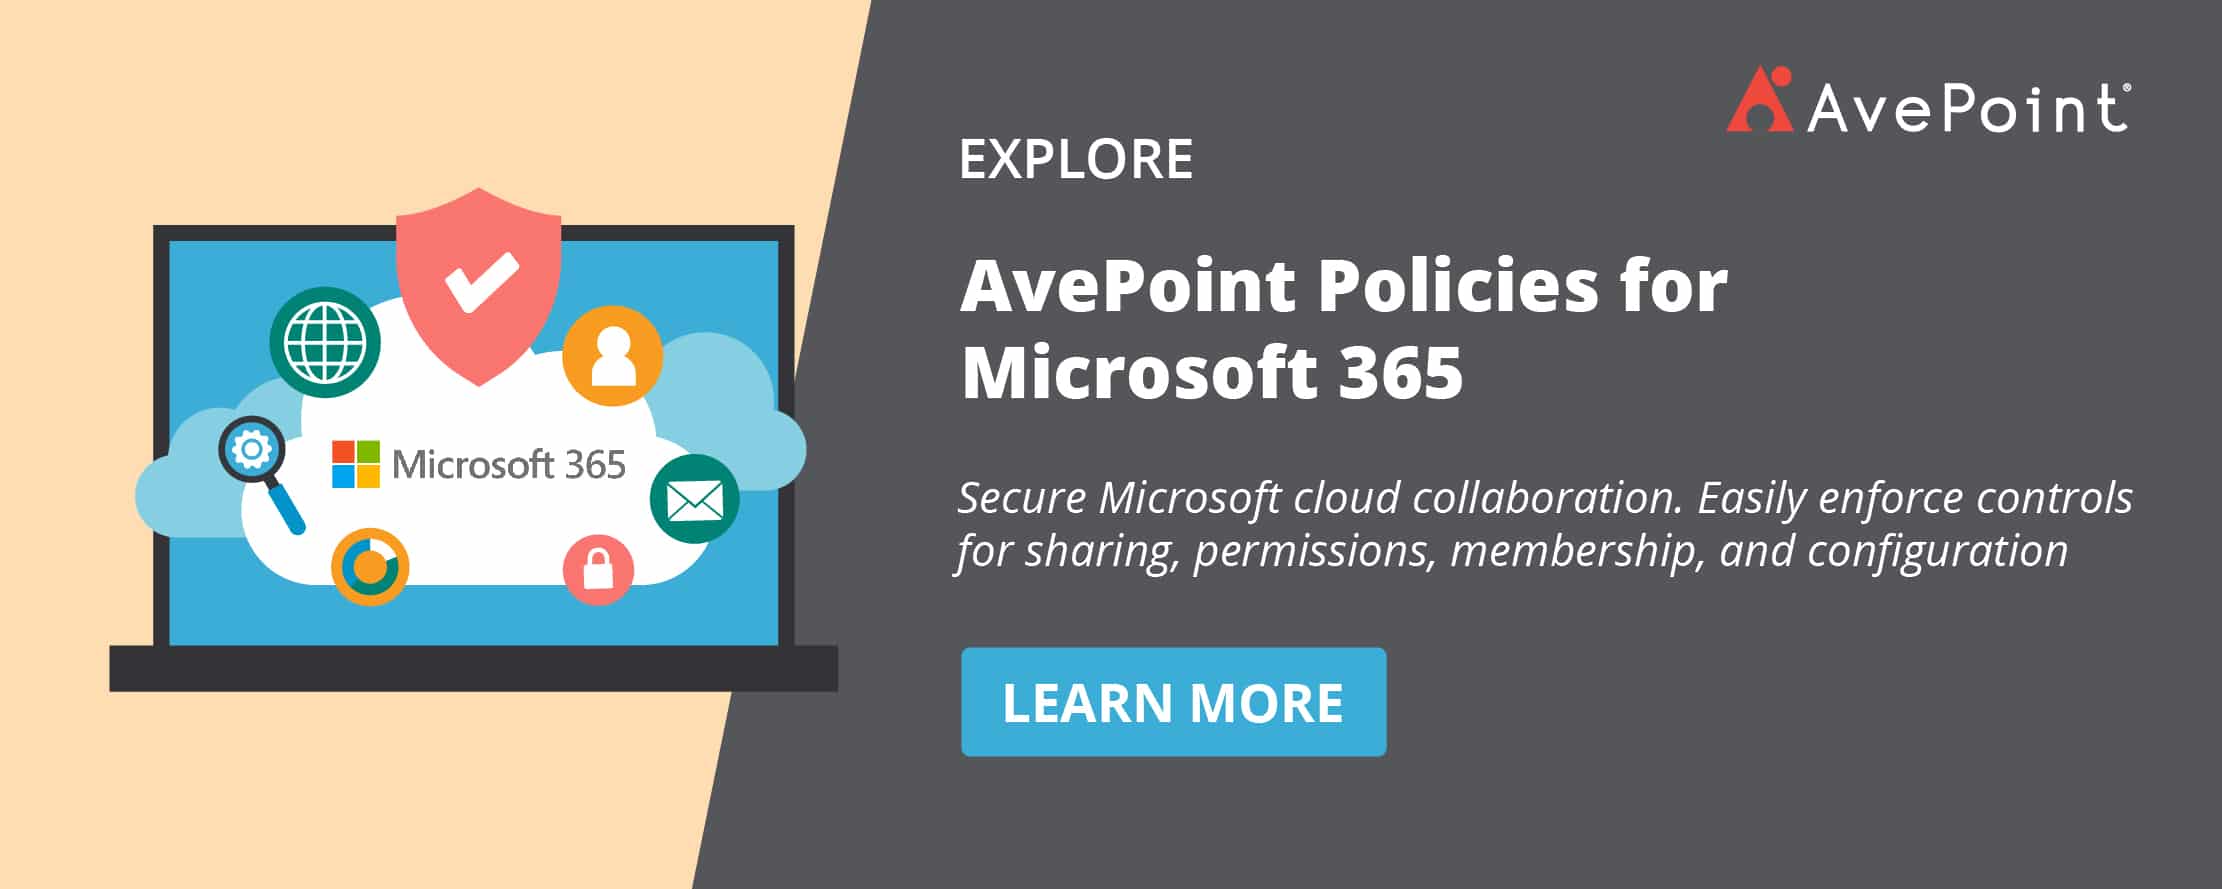 manage-collaboration-security-avepoint-policies